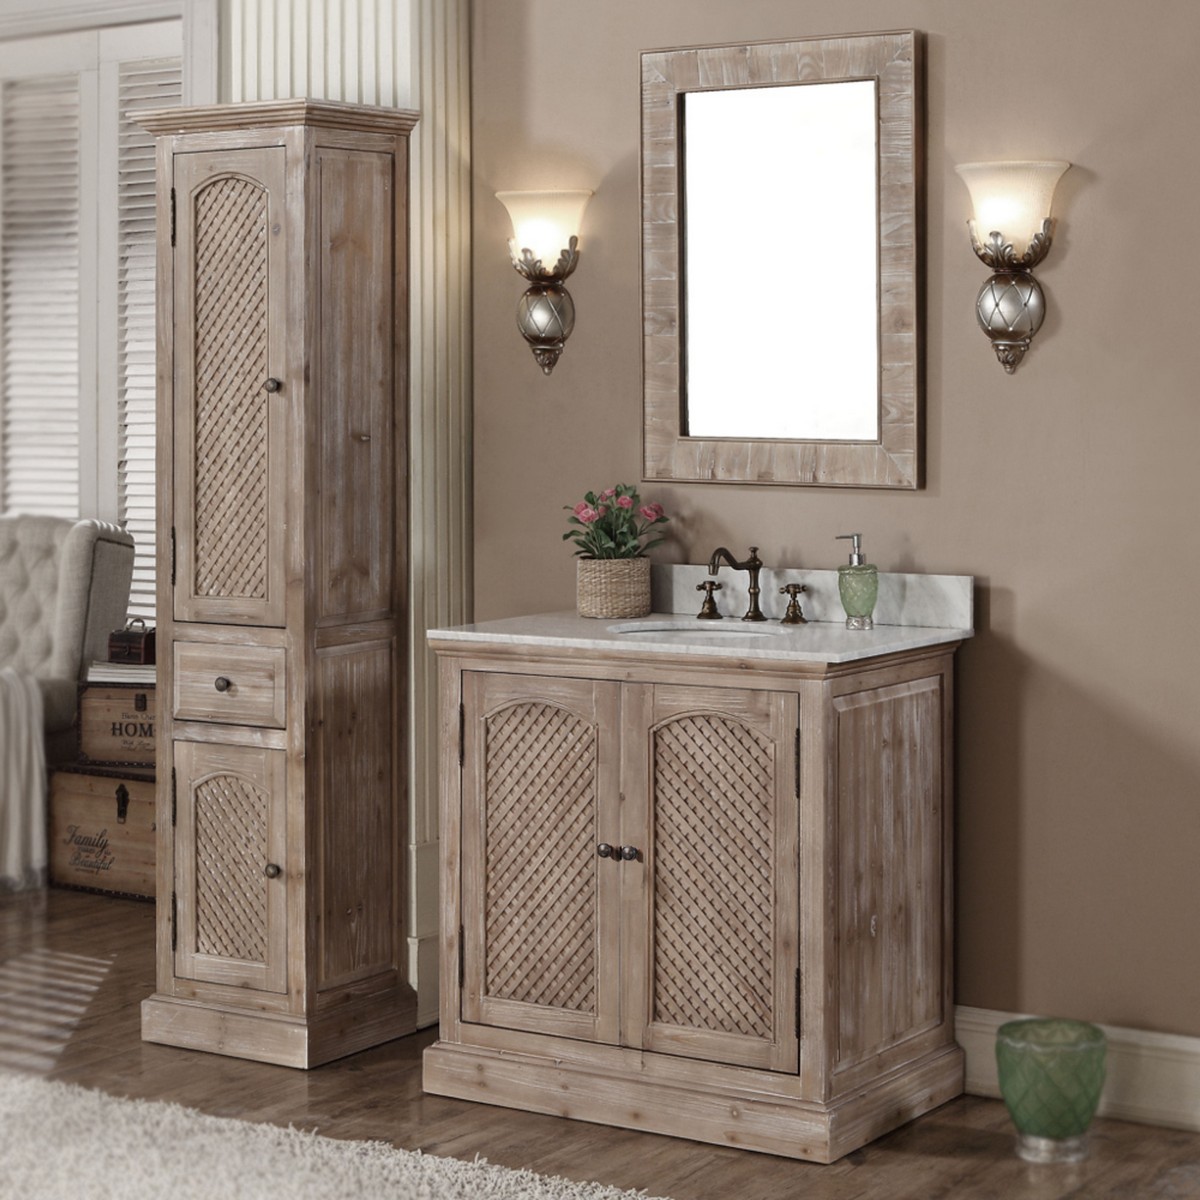 INFURNITURE WK8136+CW TOP 36 INCH SOLID RECYCLED FIR SINK VANITY WITH CARRARA WHITE MARBLE TOP